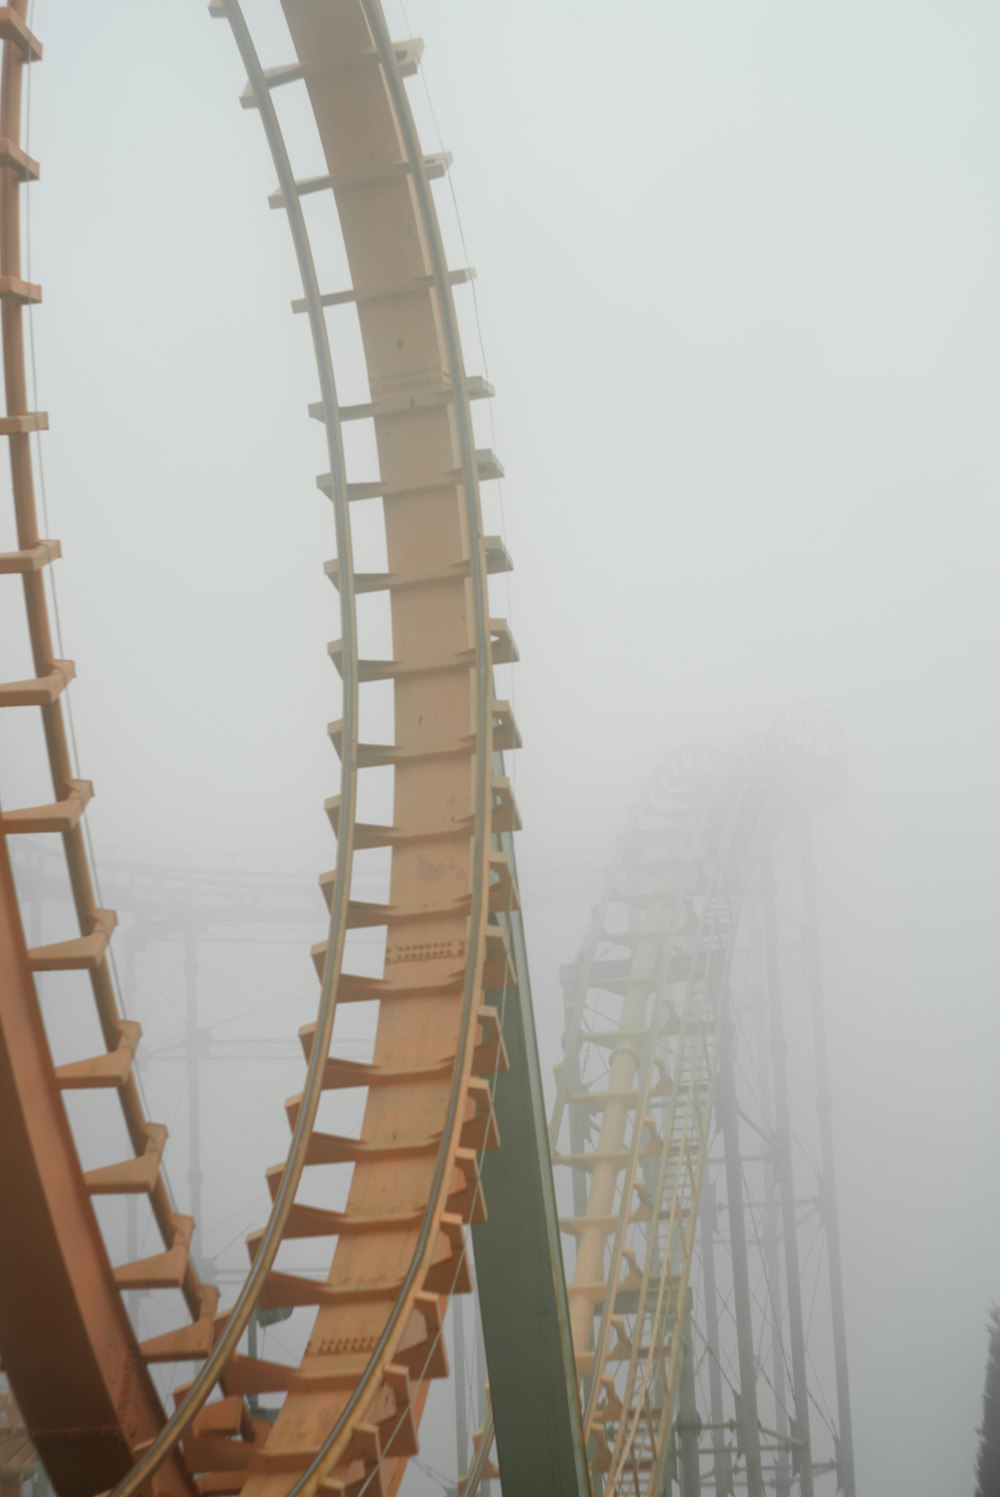 a roller coaster in the middle of a foggy day